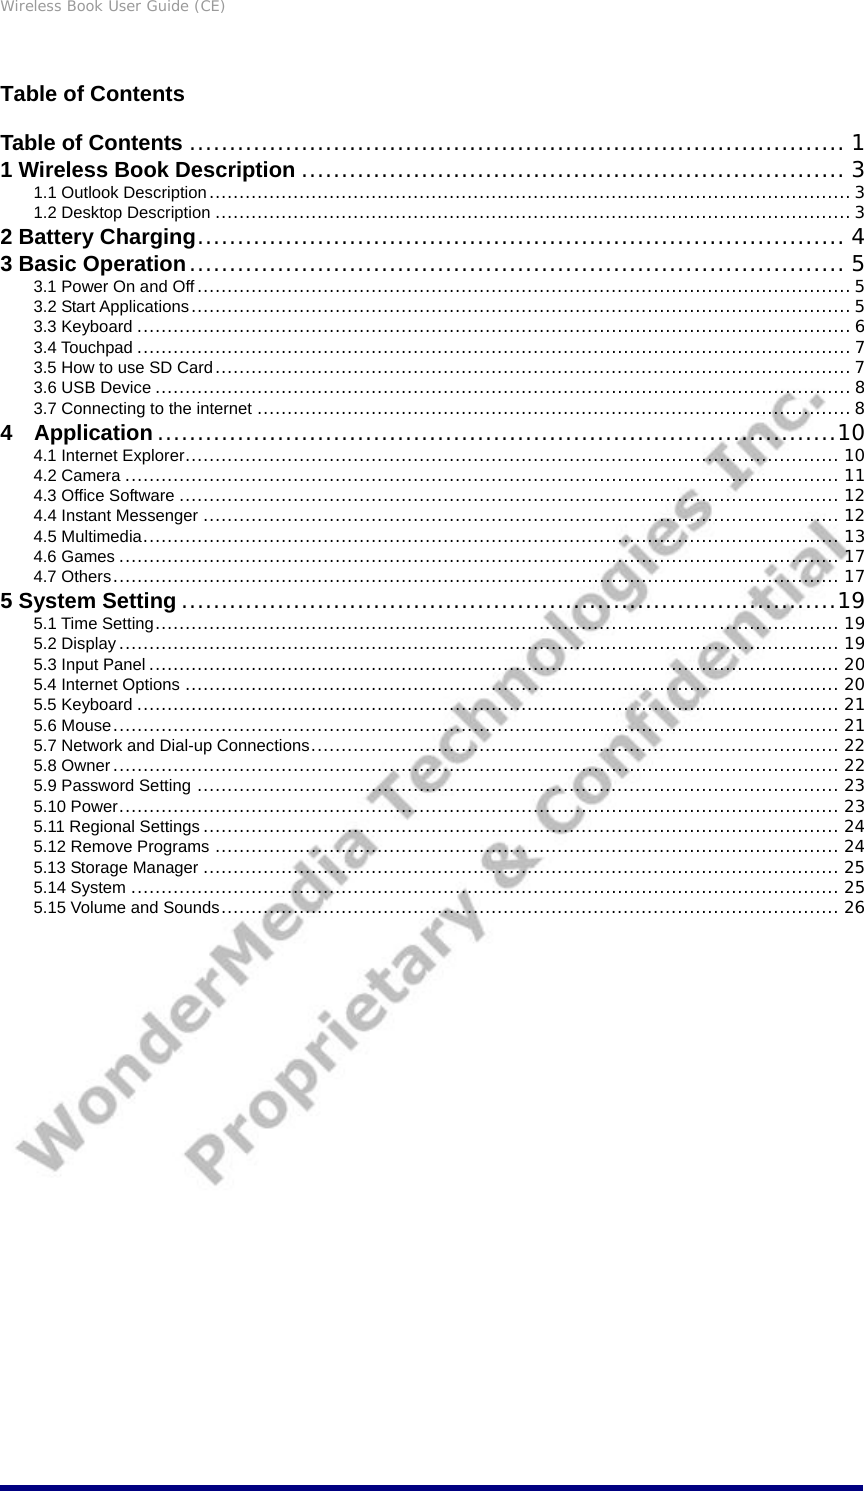 Wireless Book User Guide (CE) Table of Contents Table of Contents .................................................................................. 1 1 Wireless Book Description .................................................................... 3 1.1 Outlook Description...........................................................................................................3 1.2 Desktop Description ..........................................................................................................3 2 Battery Charging................................................................................. 4 3 Basic Operation.................................................................................. 5 3.1 Power On and Off ............................................................................................................. 5 3.2 Start Applications..............................................................................................................5 3.3 Keyboard .......................................................................................................................6 3.4 Touchpad .......................................................................................................................7 3.5 How to use SD Card..........................................................................................................7 3.6 USB Device .................................................................................................................... 8 3.7 Connecting to the internet ................................................................................................... 8 4  Application .....................................................................................10 4.1 Internet Explorer............................................................................................................. 10 4.2 Camera ....................................................................................................................... 11 4.3 Office Software .............................................................................................................. 12 4.4 Instant Messenger .......................................................................................................... 12 4.5 Multimedia.................................................................................................................... 13 4.6 Games ........................................................................................................................ 17 4.7 Others......................................................................................................................... 17 5 System Setting ..................................................................................19 5.1 Time Setting.................................................................................................................. 19 5.2 Display ........................................................................................................................ 19 5.3 Input Panel ................................................................................................................... 20 5.4 Internet Options ............................................................................................................. 20 5.5 Keyboard ..................................................................................................................... 21 5.6 Mouse......................................................................................................................... 21 5.7 Network and Dial-up Connections........................................................................................ 22 5.8 Owner ......................................................................................................................... 22 5.9 Password Setting ........................................................................................................... 23 5.10 Power........................................................................................................................ 23 5.11 Regional Settings .......................................................................................................... 24 5.12 Remove Programs ........................................................................................................ 24 5.13 Storage Manager .......................................................................................................... 25 5.14 System ...................................................................................................................... 25 5.15 Volume and Sounds....................................................................................................... 26                        